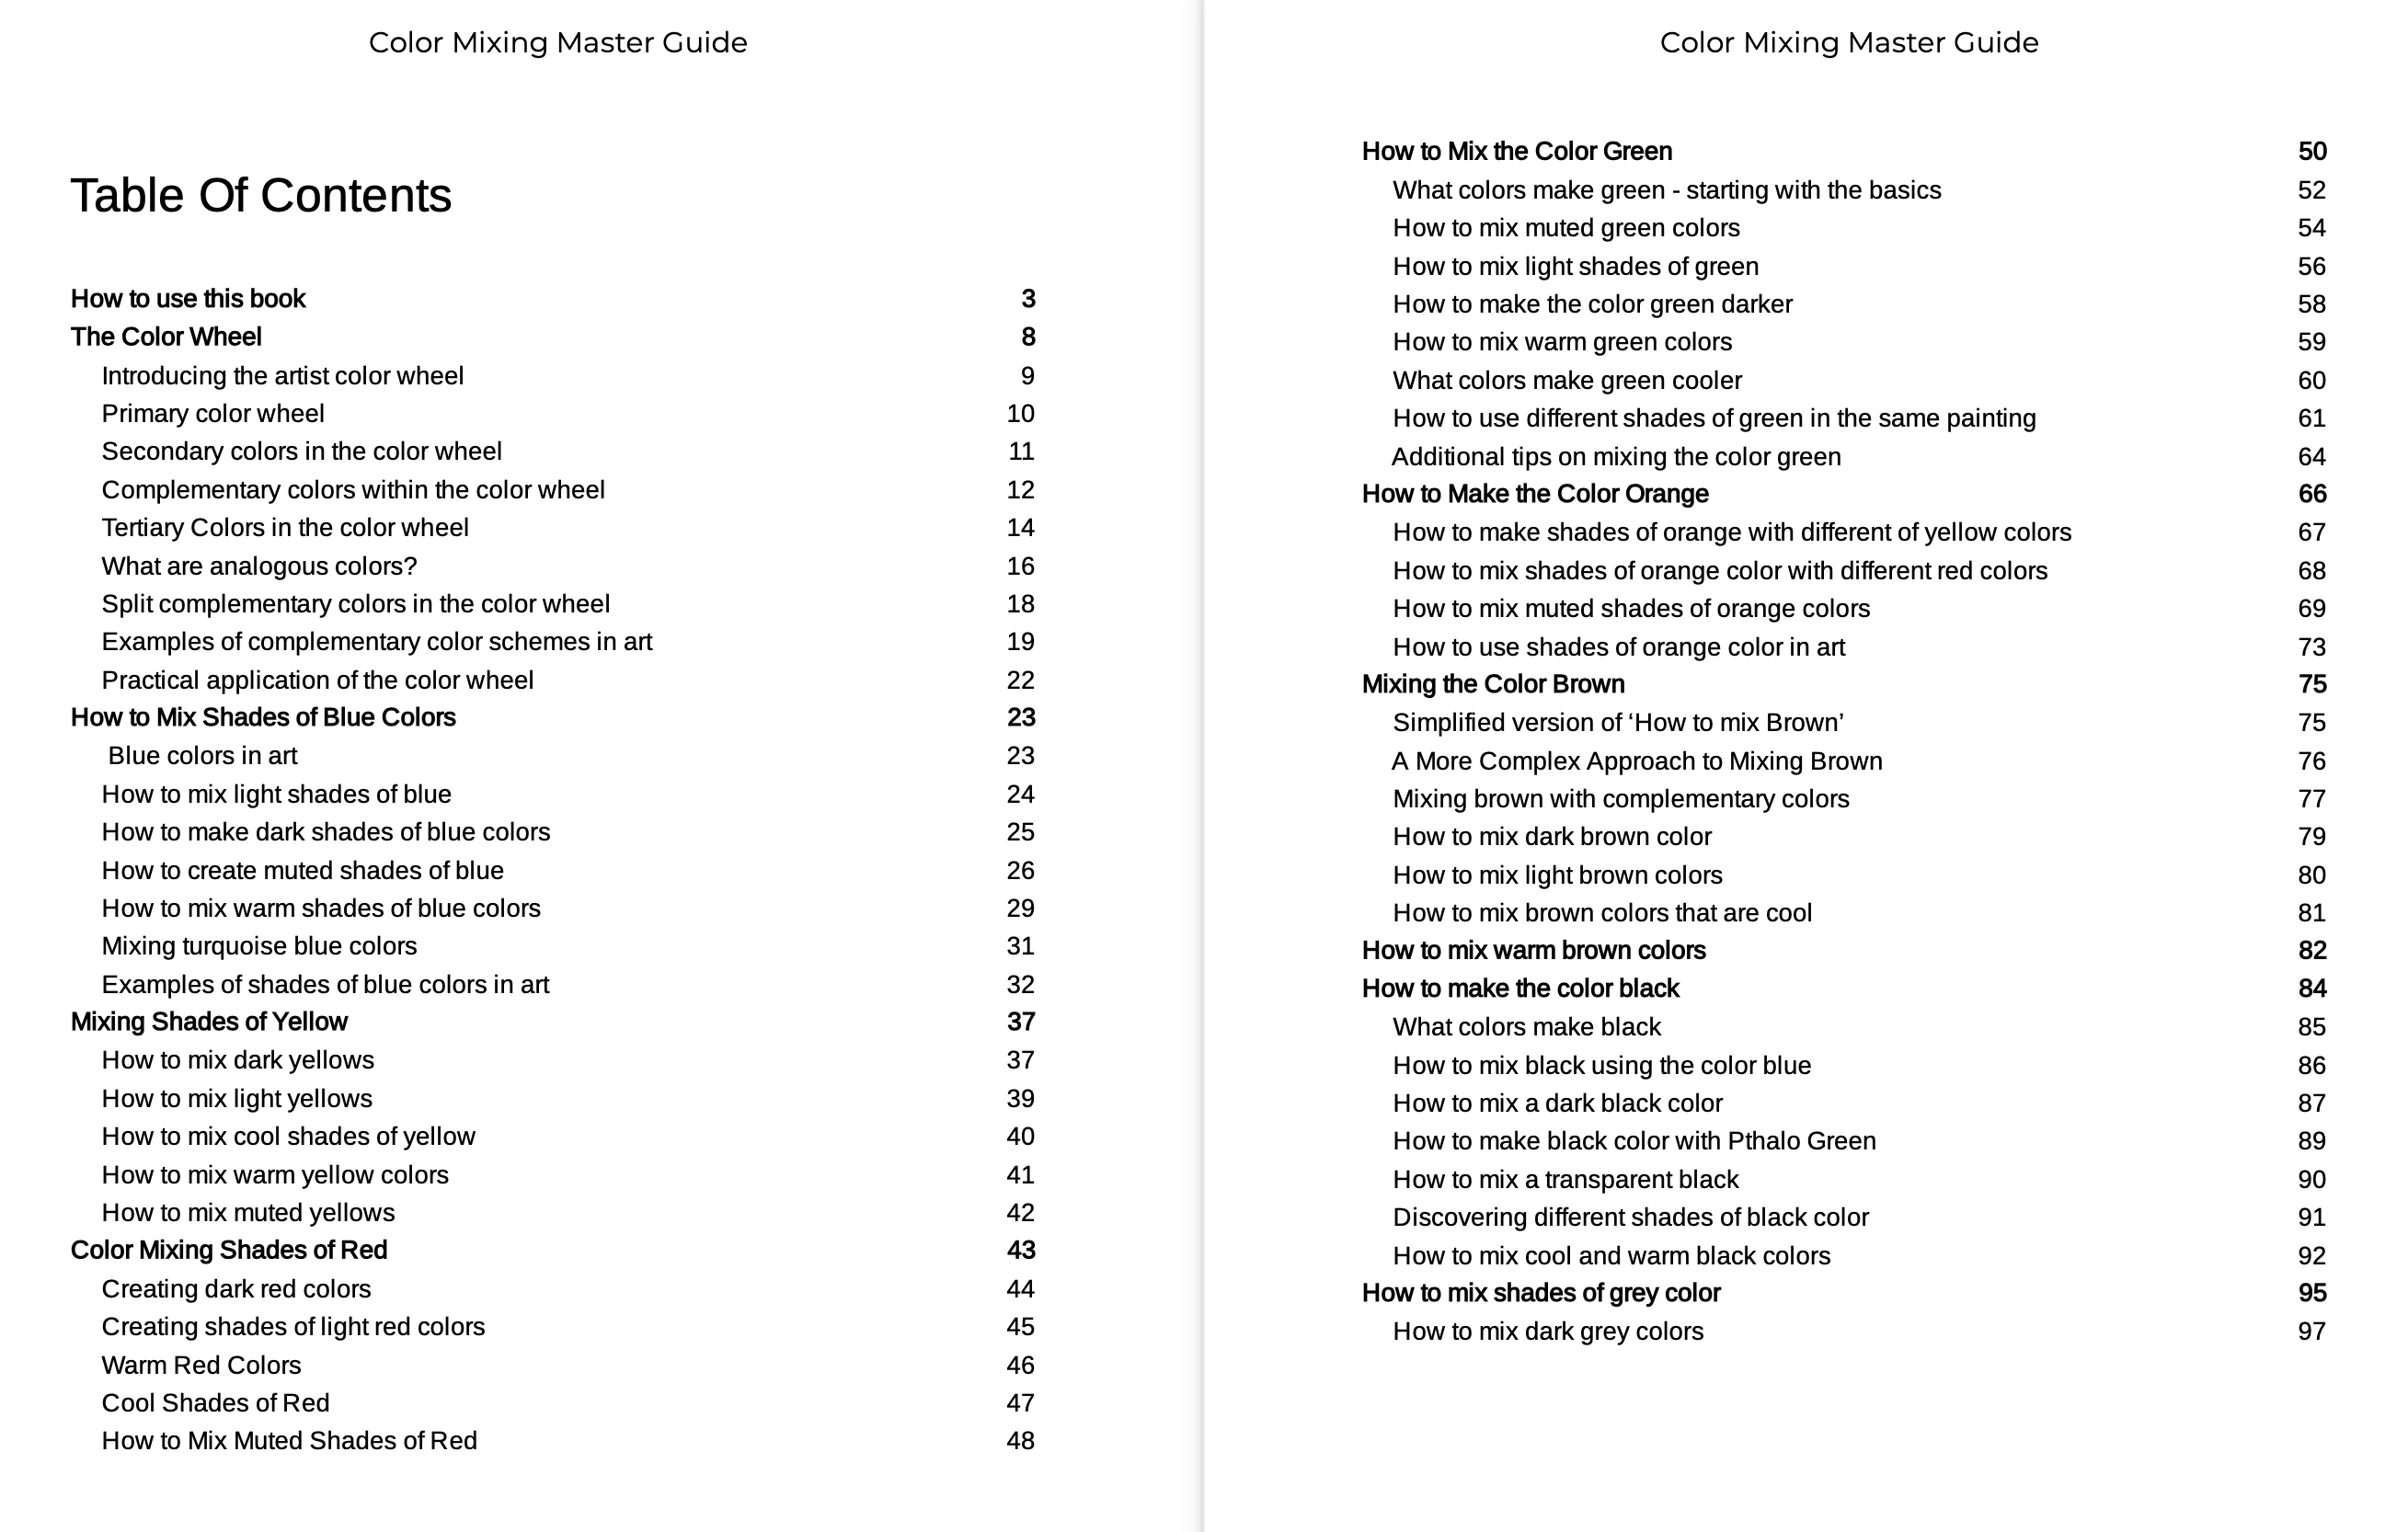 Color mixing master guide ebook table of contents